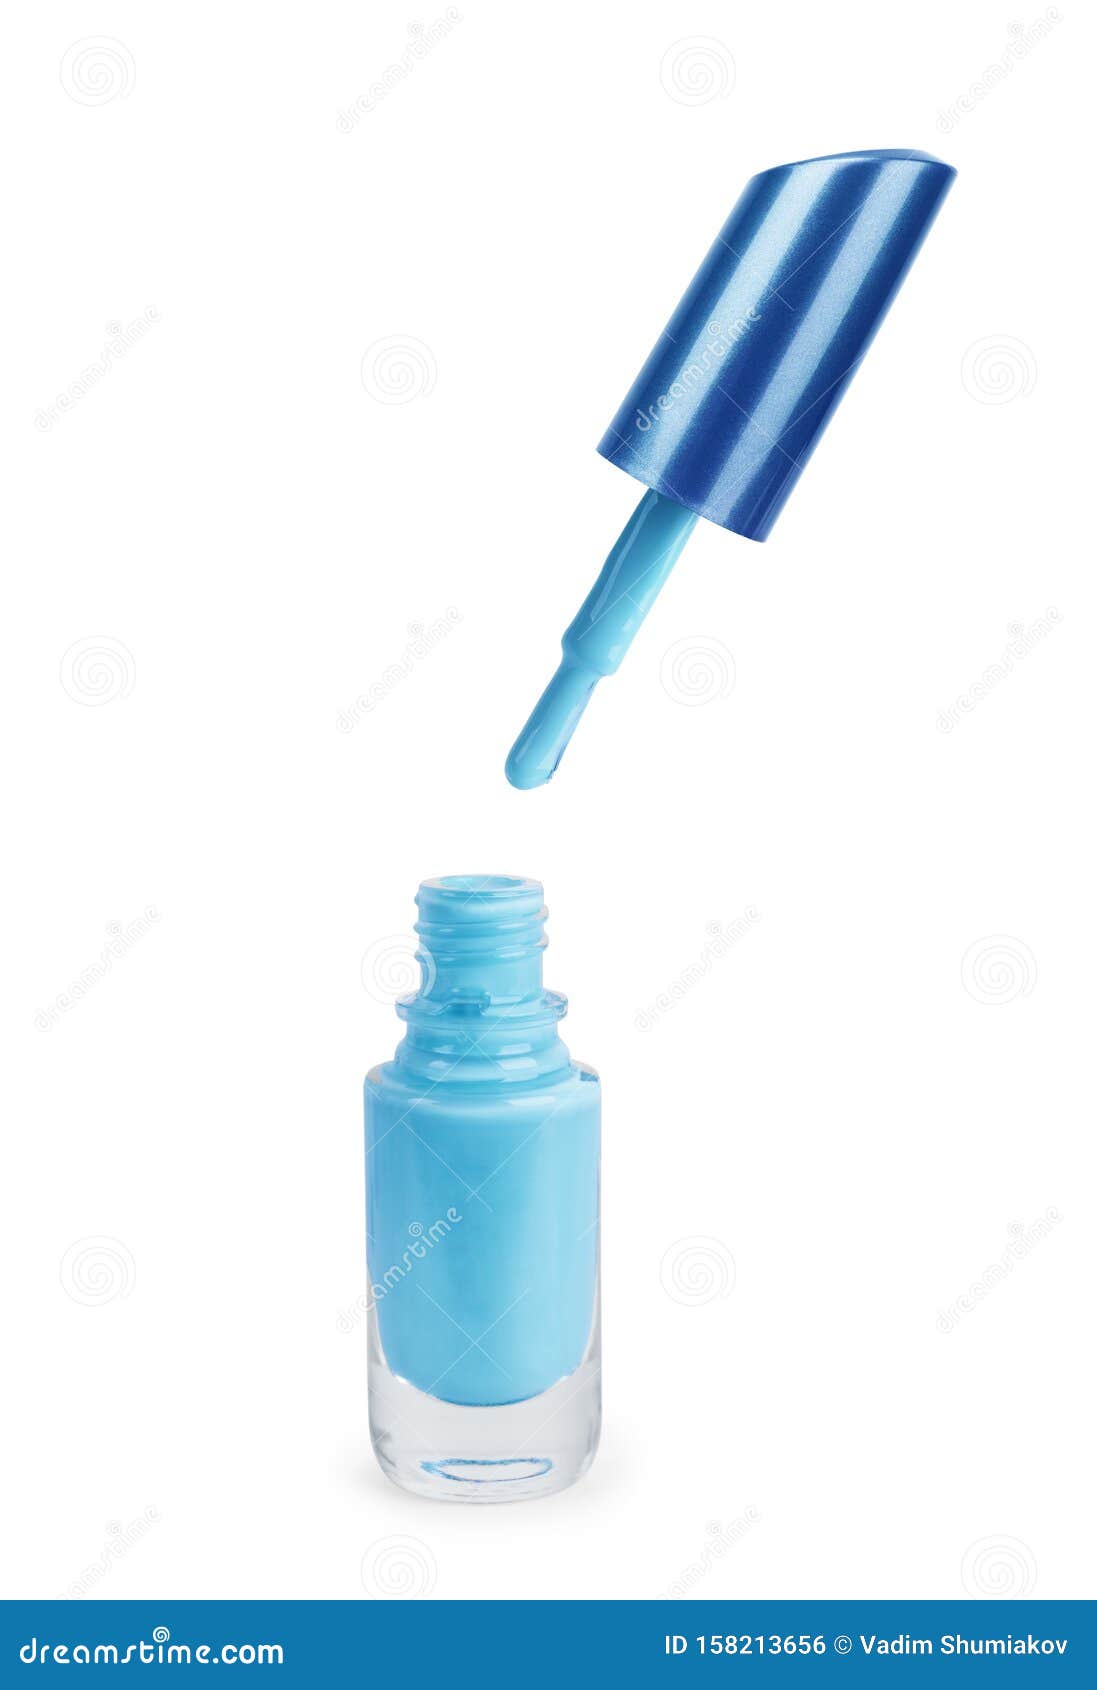 open nail polish with a brush on a white background